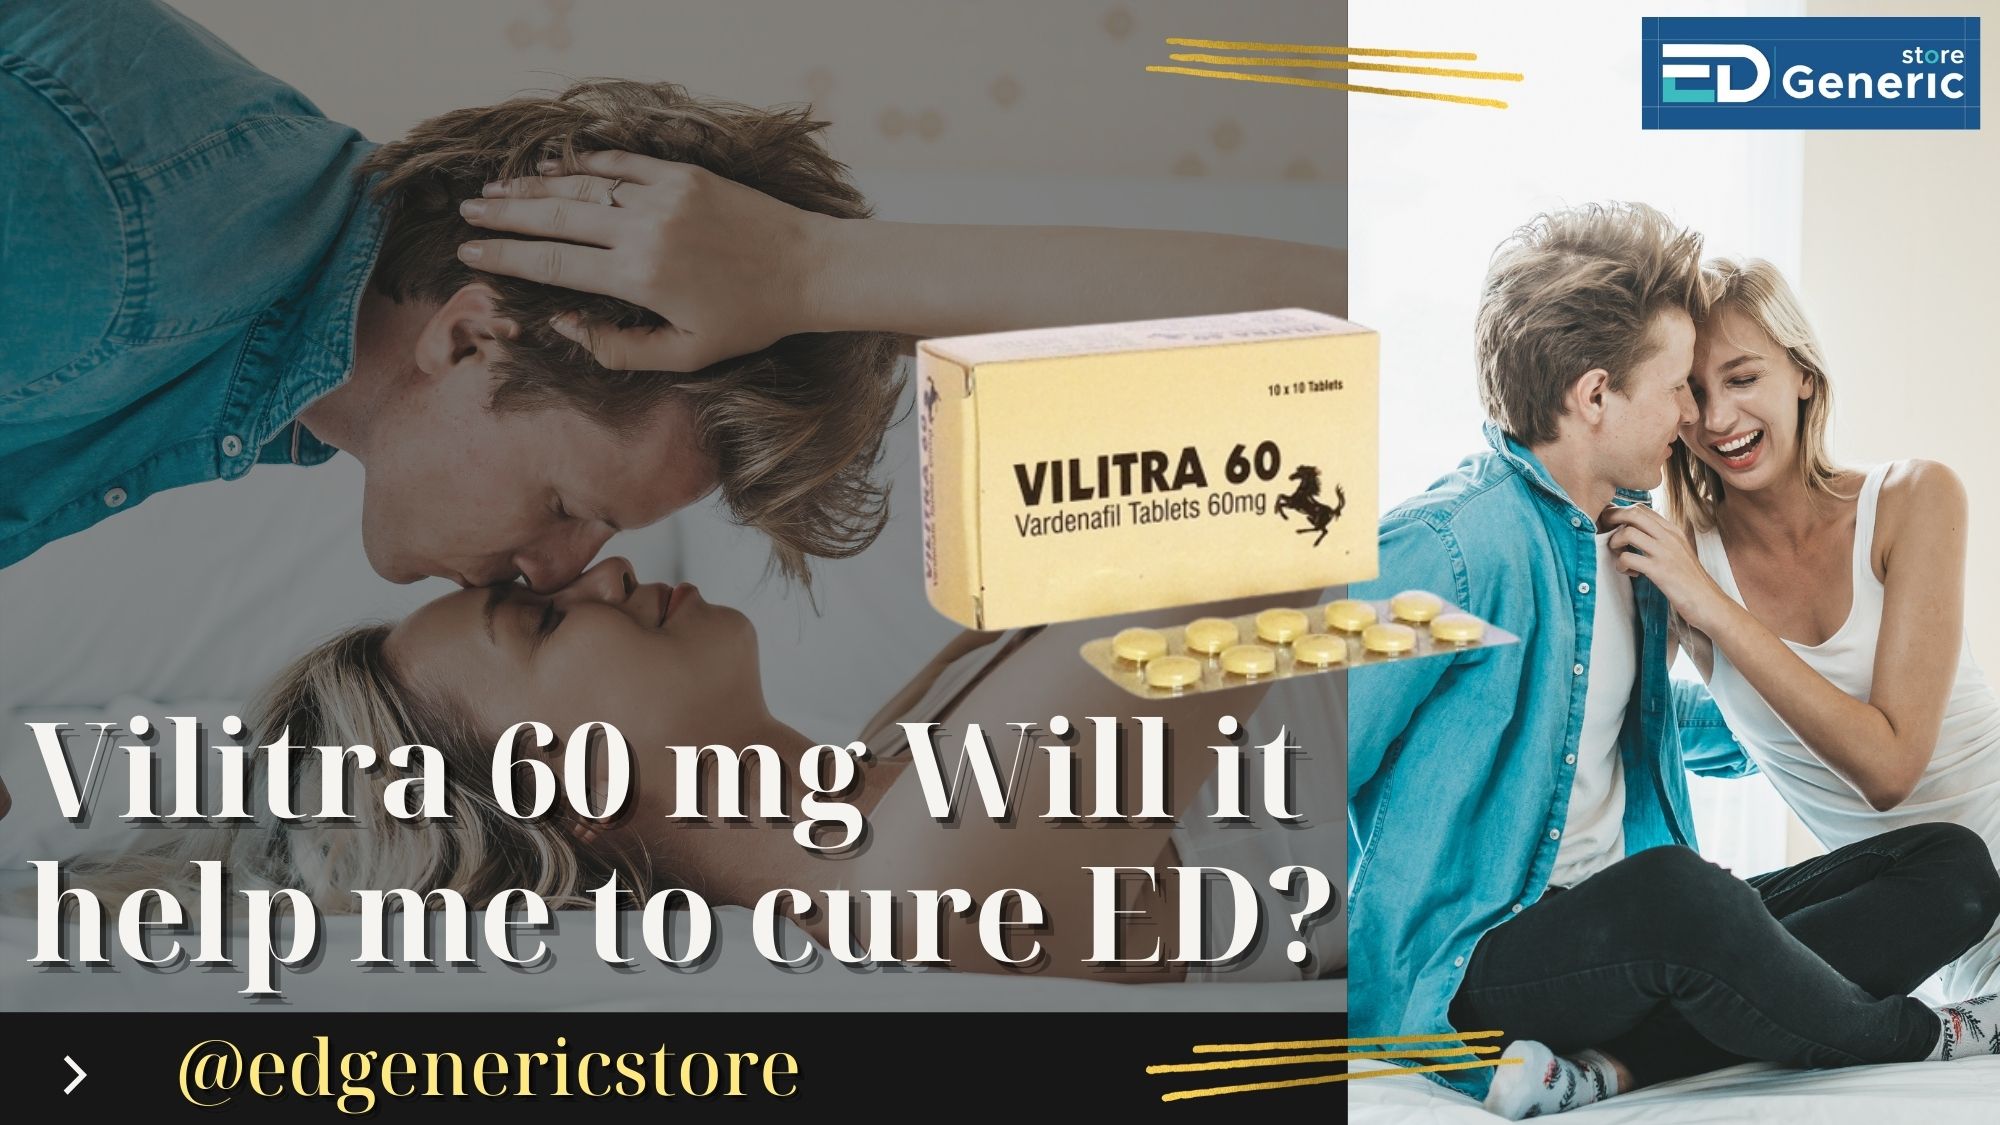 Vilitra 60 mg cure ED - Ed generic store